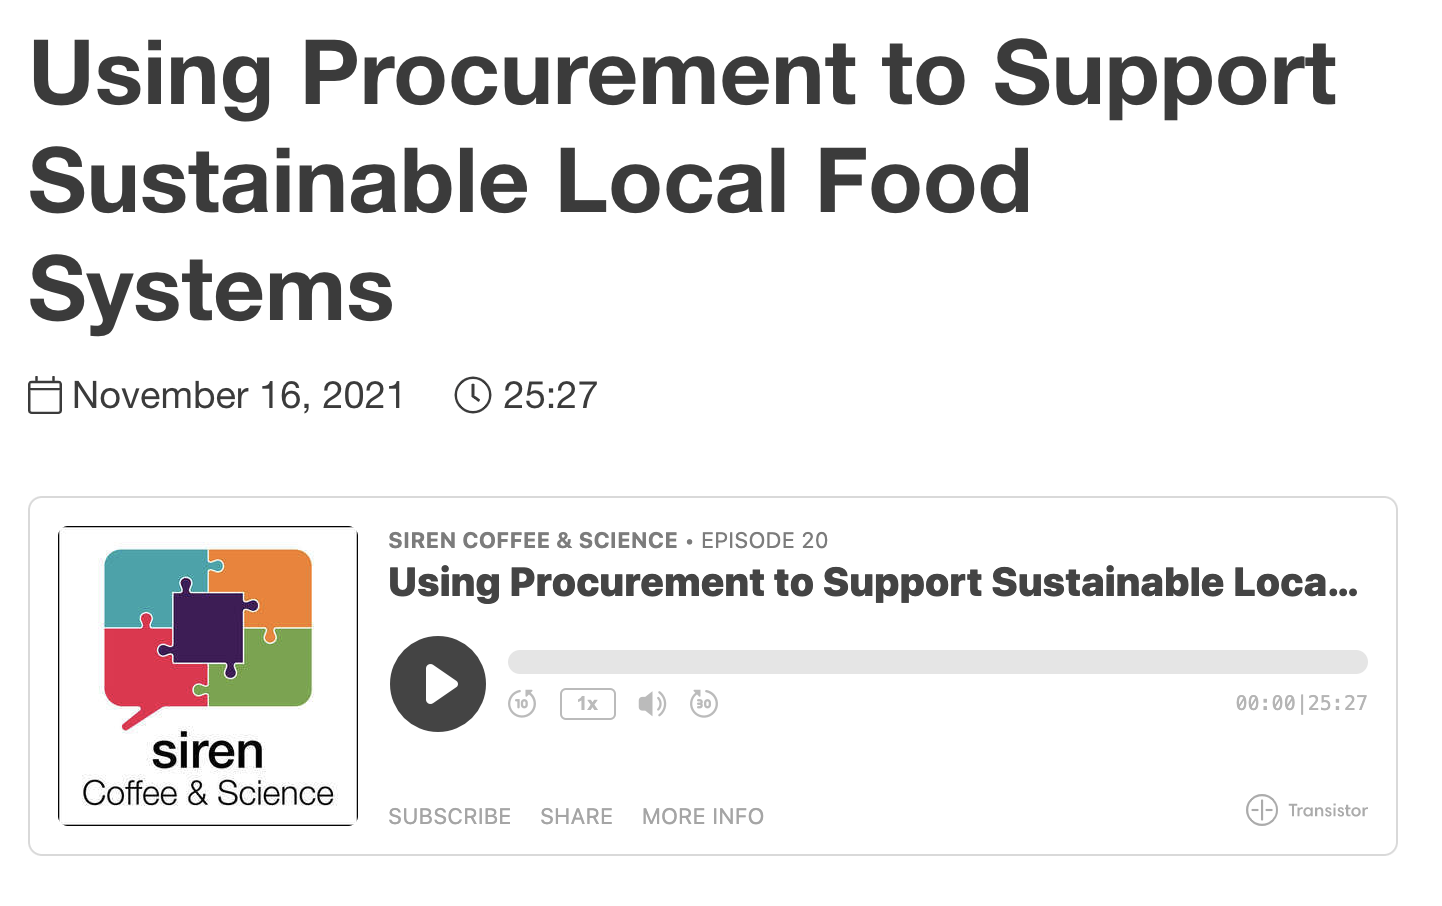 Using Procurement to Support Sustainable Local Food Systems